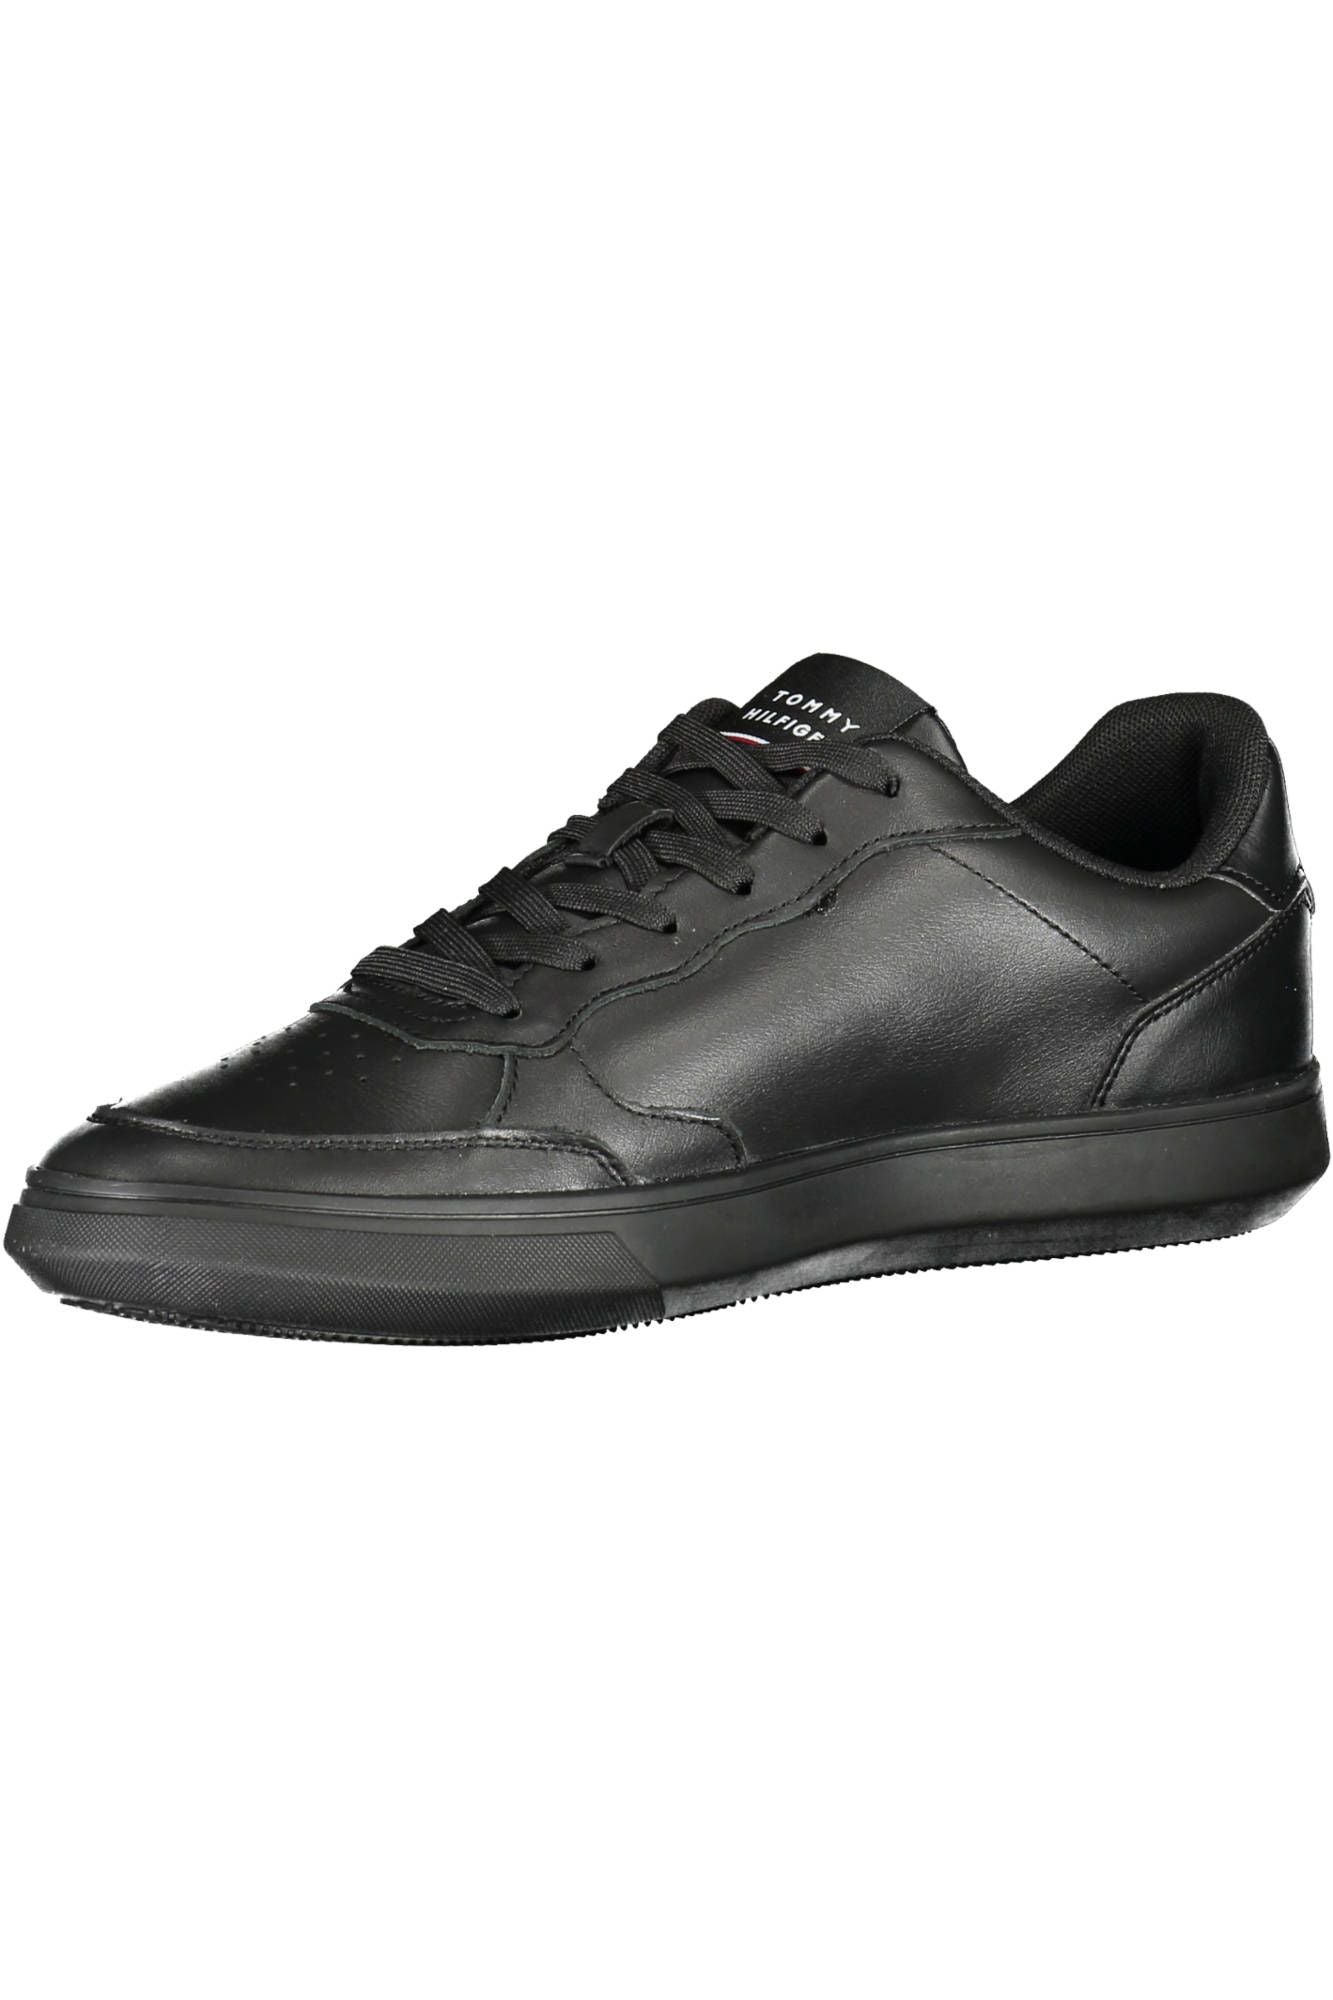 Iconic Black Leather Sneakers with Embroidery Accent